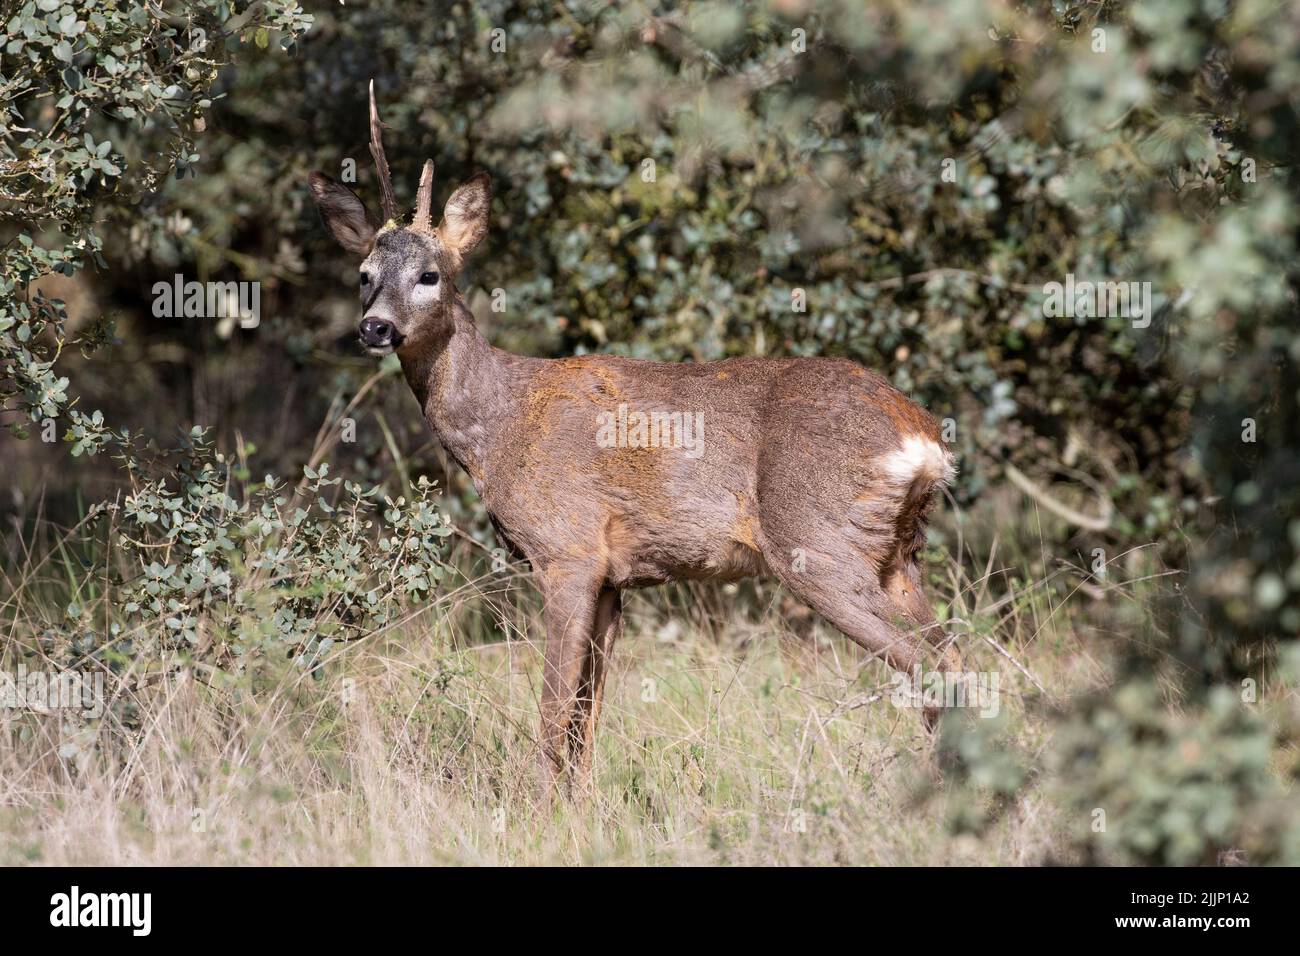 Buck of capreolus capreolus deer with broken antlers standing on grass near lush bushes outside woodland Stock Photo